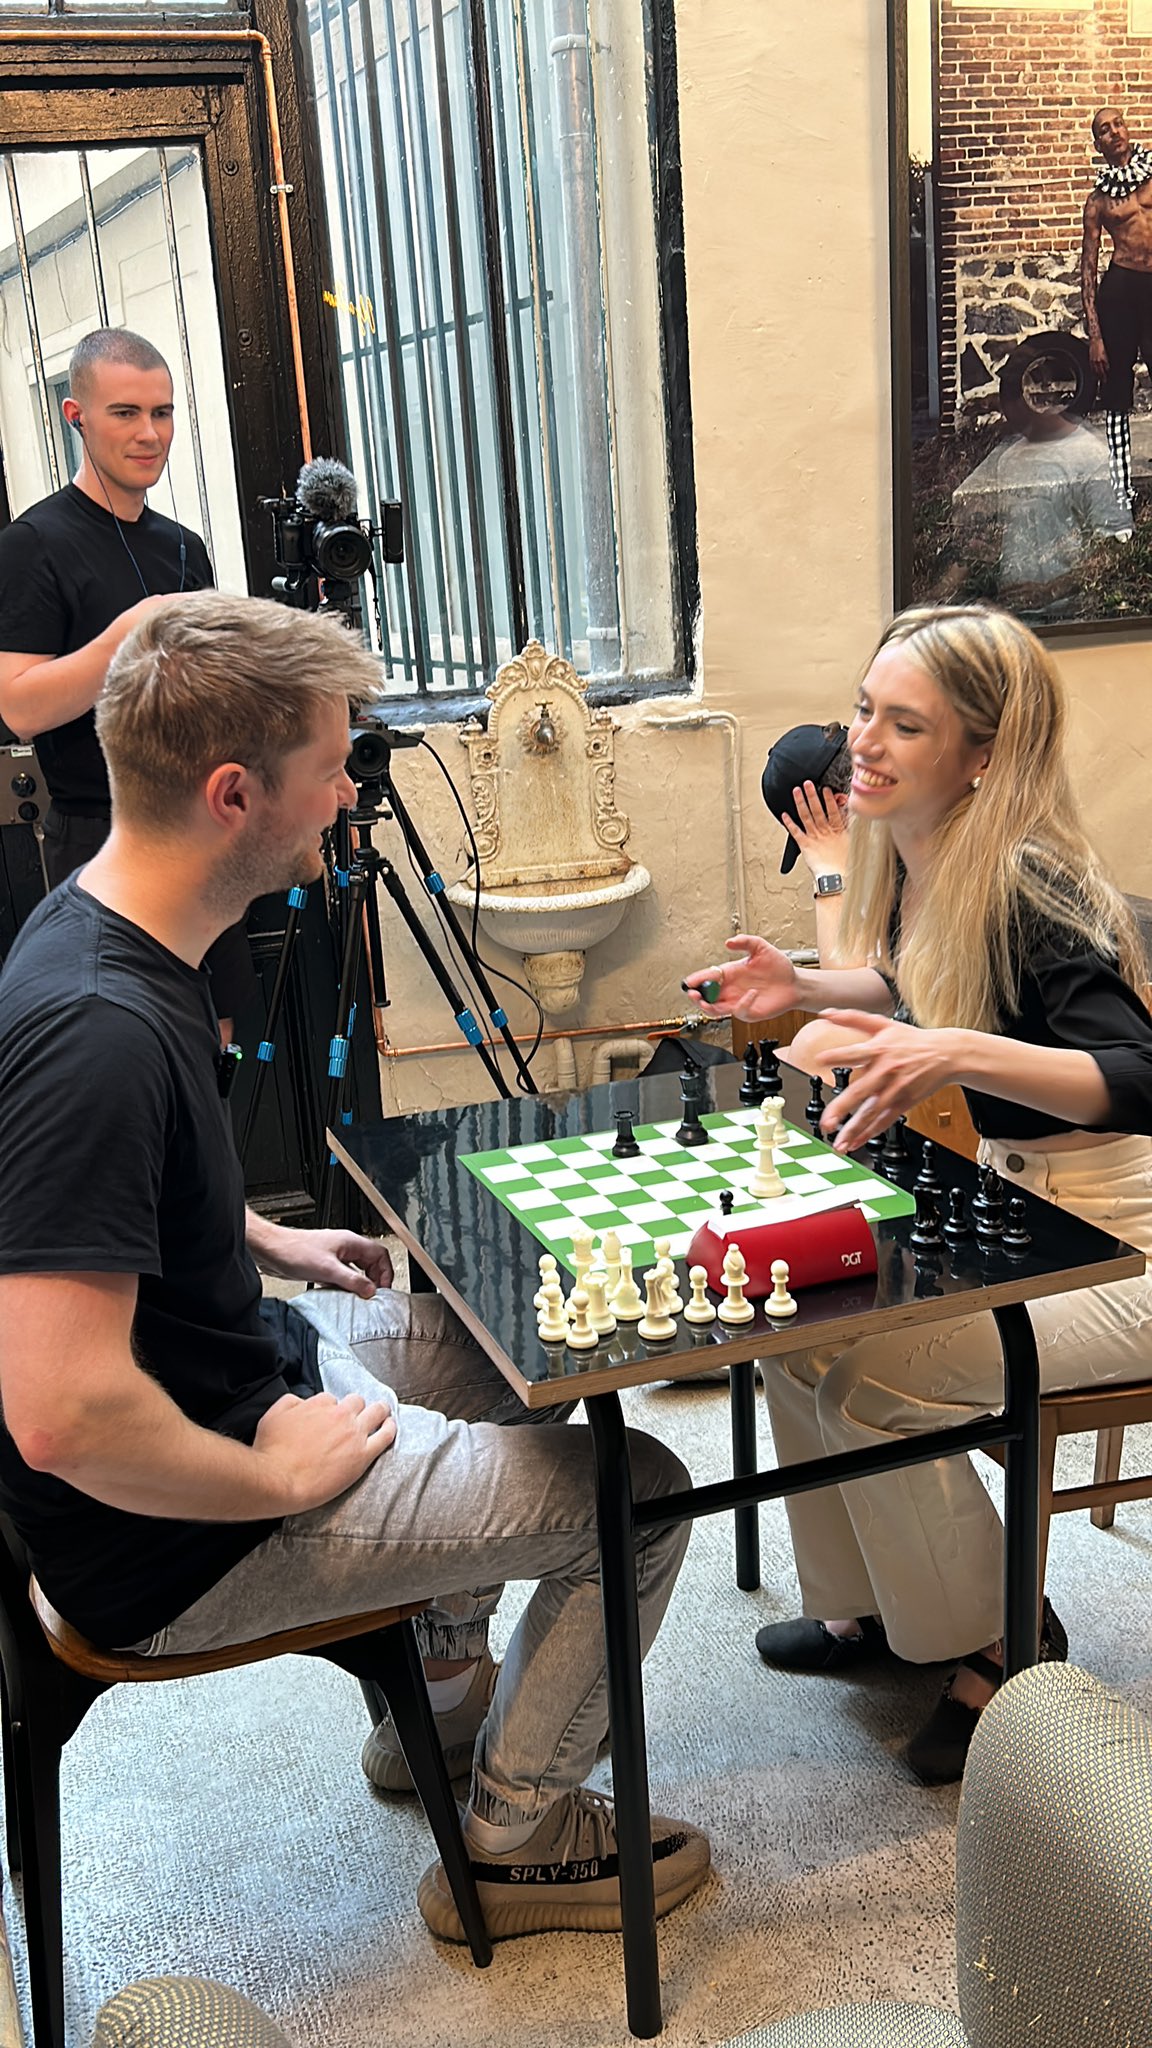 Anna Cramling and MVL playing in a bar in Paris rn : r/chess